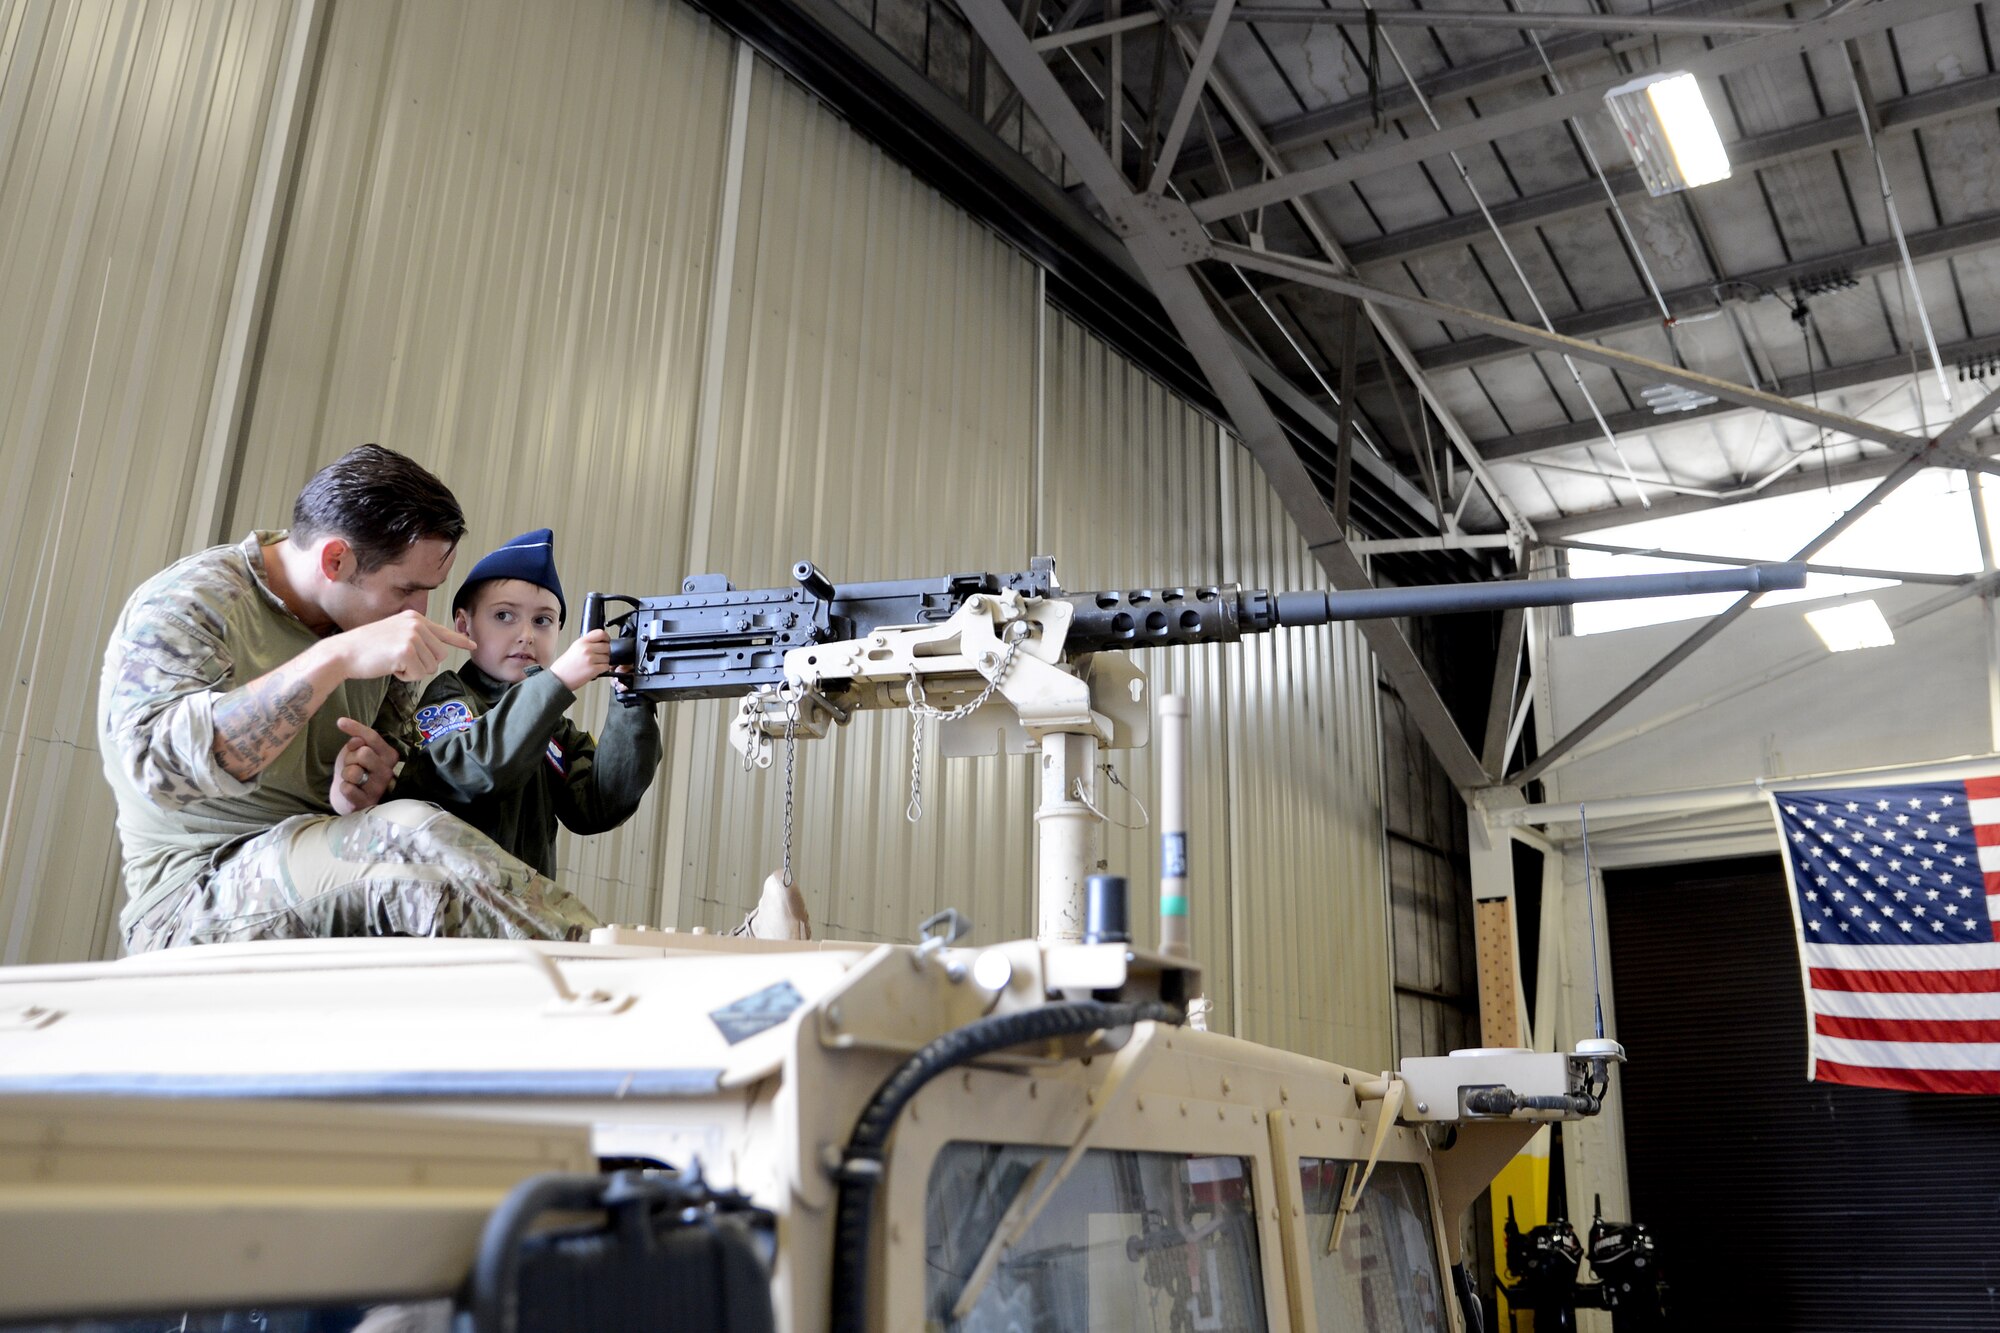 Ewan McFadgen, Pilot for a Day, sits in a turret of an armored Humvee with a combat controller at the 22nd Special Tactics Squadron, July 10, 2015, during his tour of Joint Base Lewis-McChord, Wash. While at the 22nd STS, McFadgen visited the air traffic control simulator and was able to listen to the commands over the radio. (U.S. Air Force photo/Airman 1st Class Keoni Chavarria)